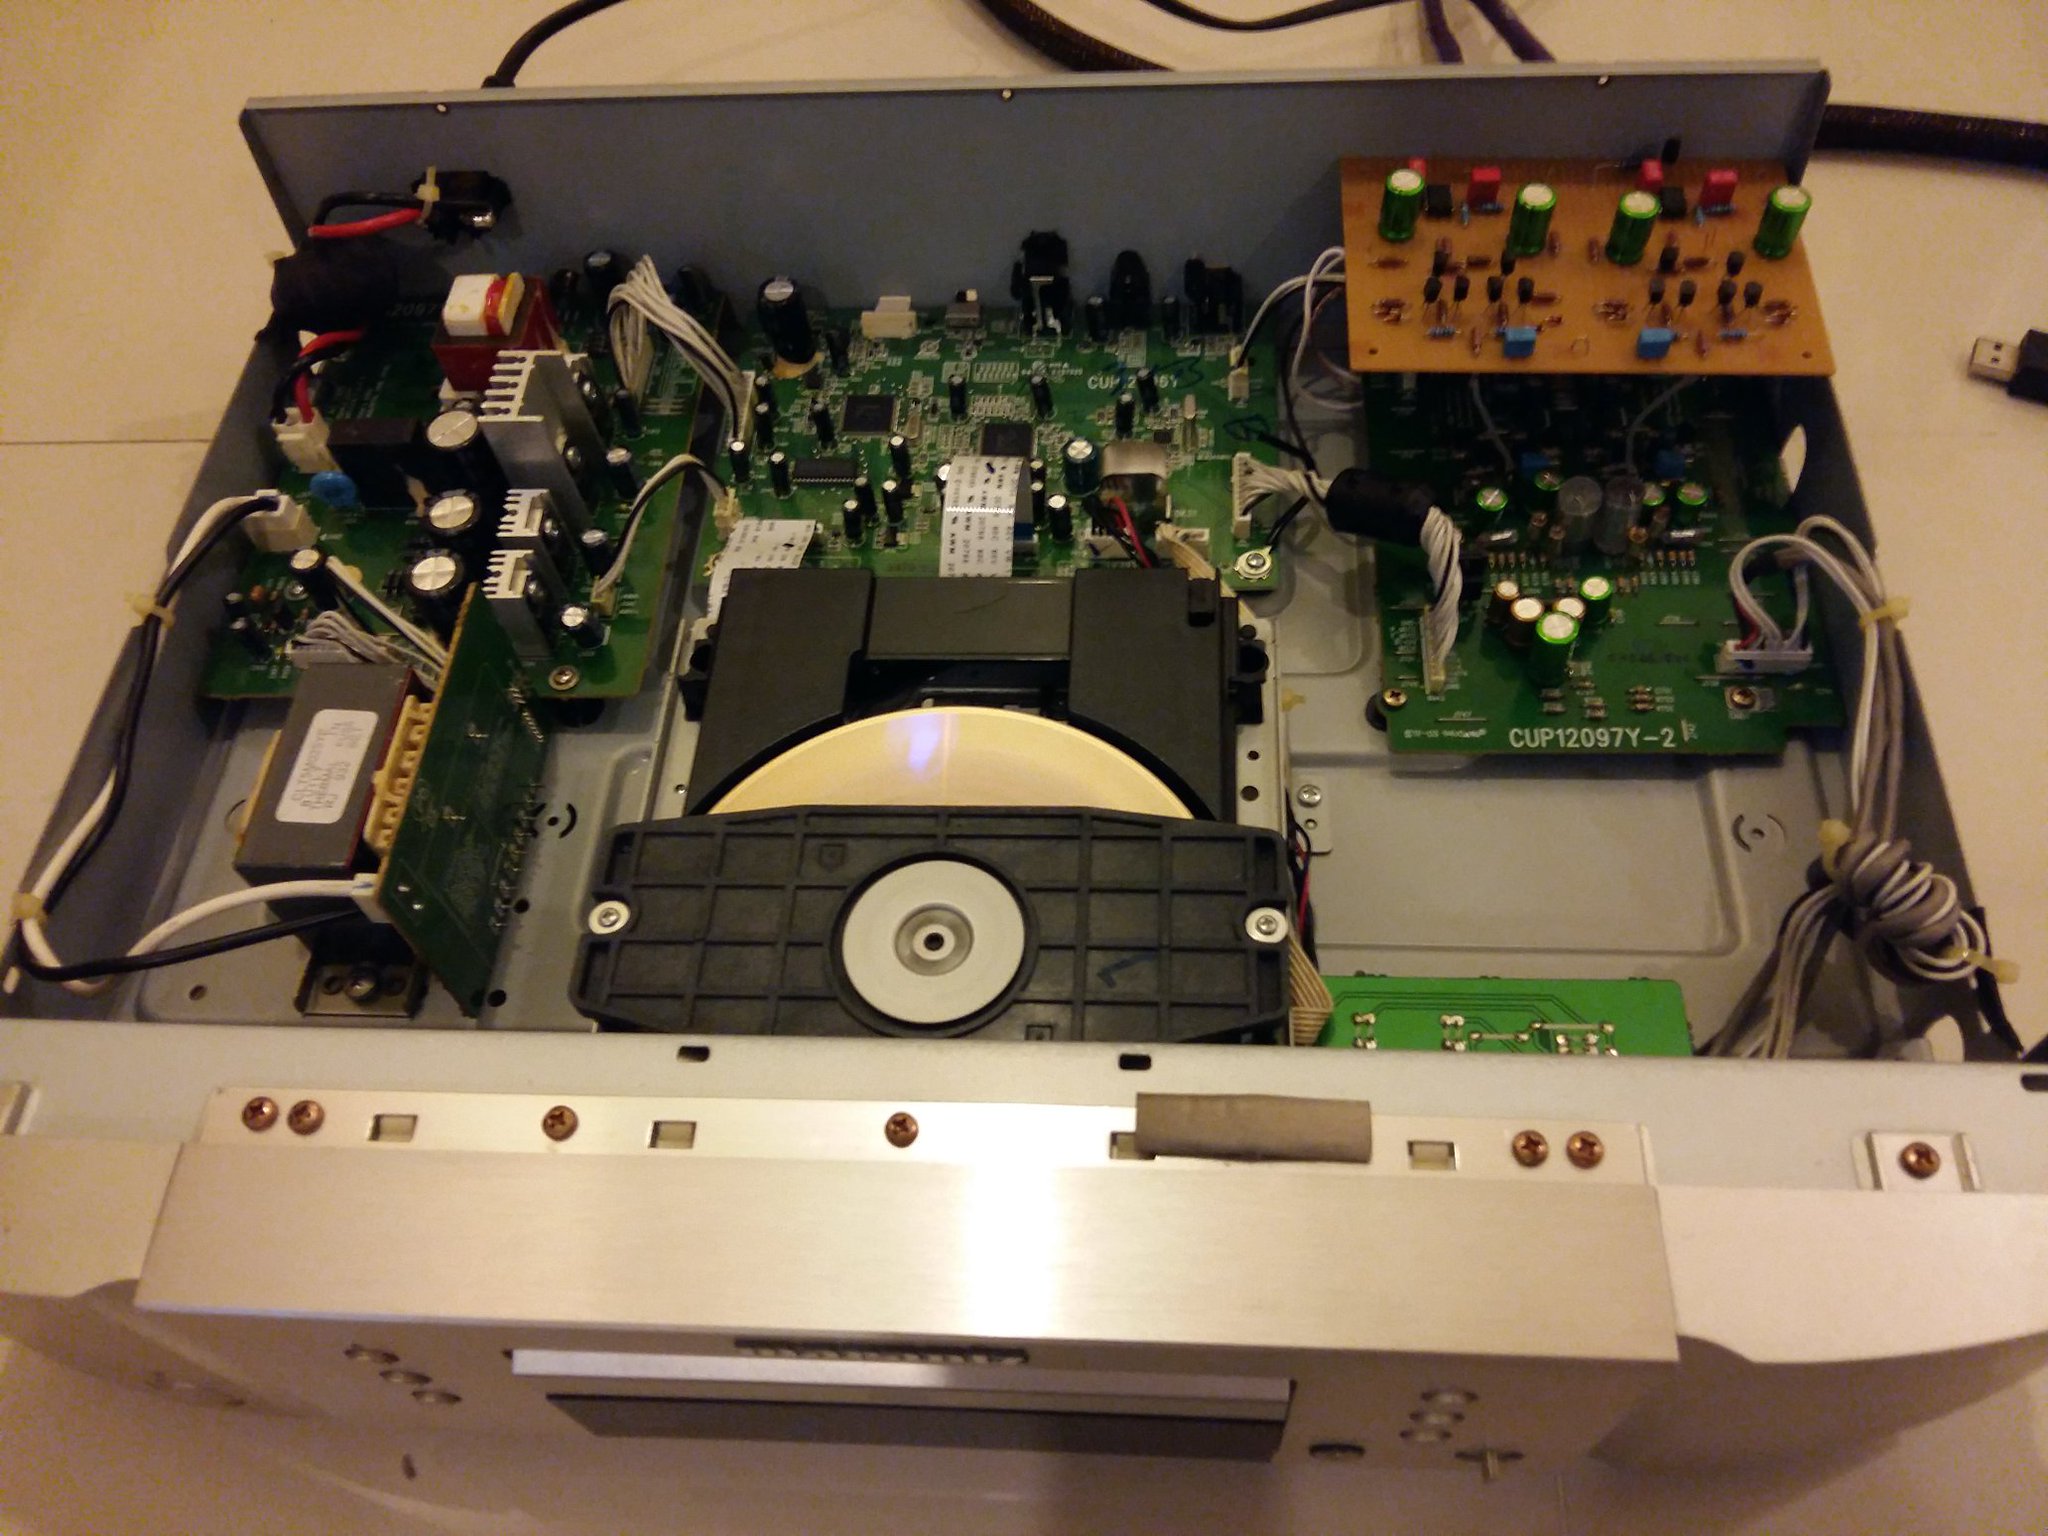 Thanaporn on Twitter: "Just finished my #Marantz #CD5003 #upgrade replace  #HDAM with my discrete output stage with direct coupling.  https://t.co/JCPPFI55Yy" / Twitter